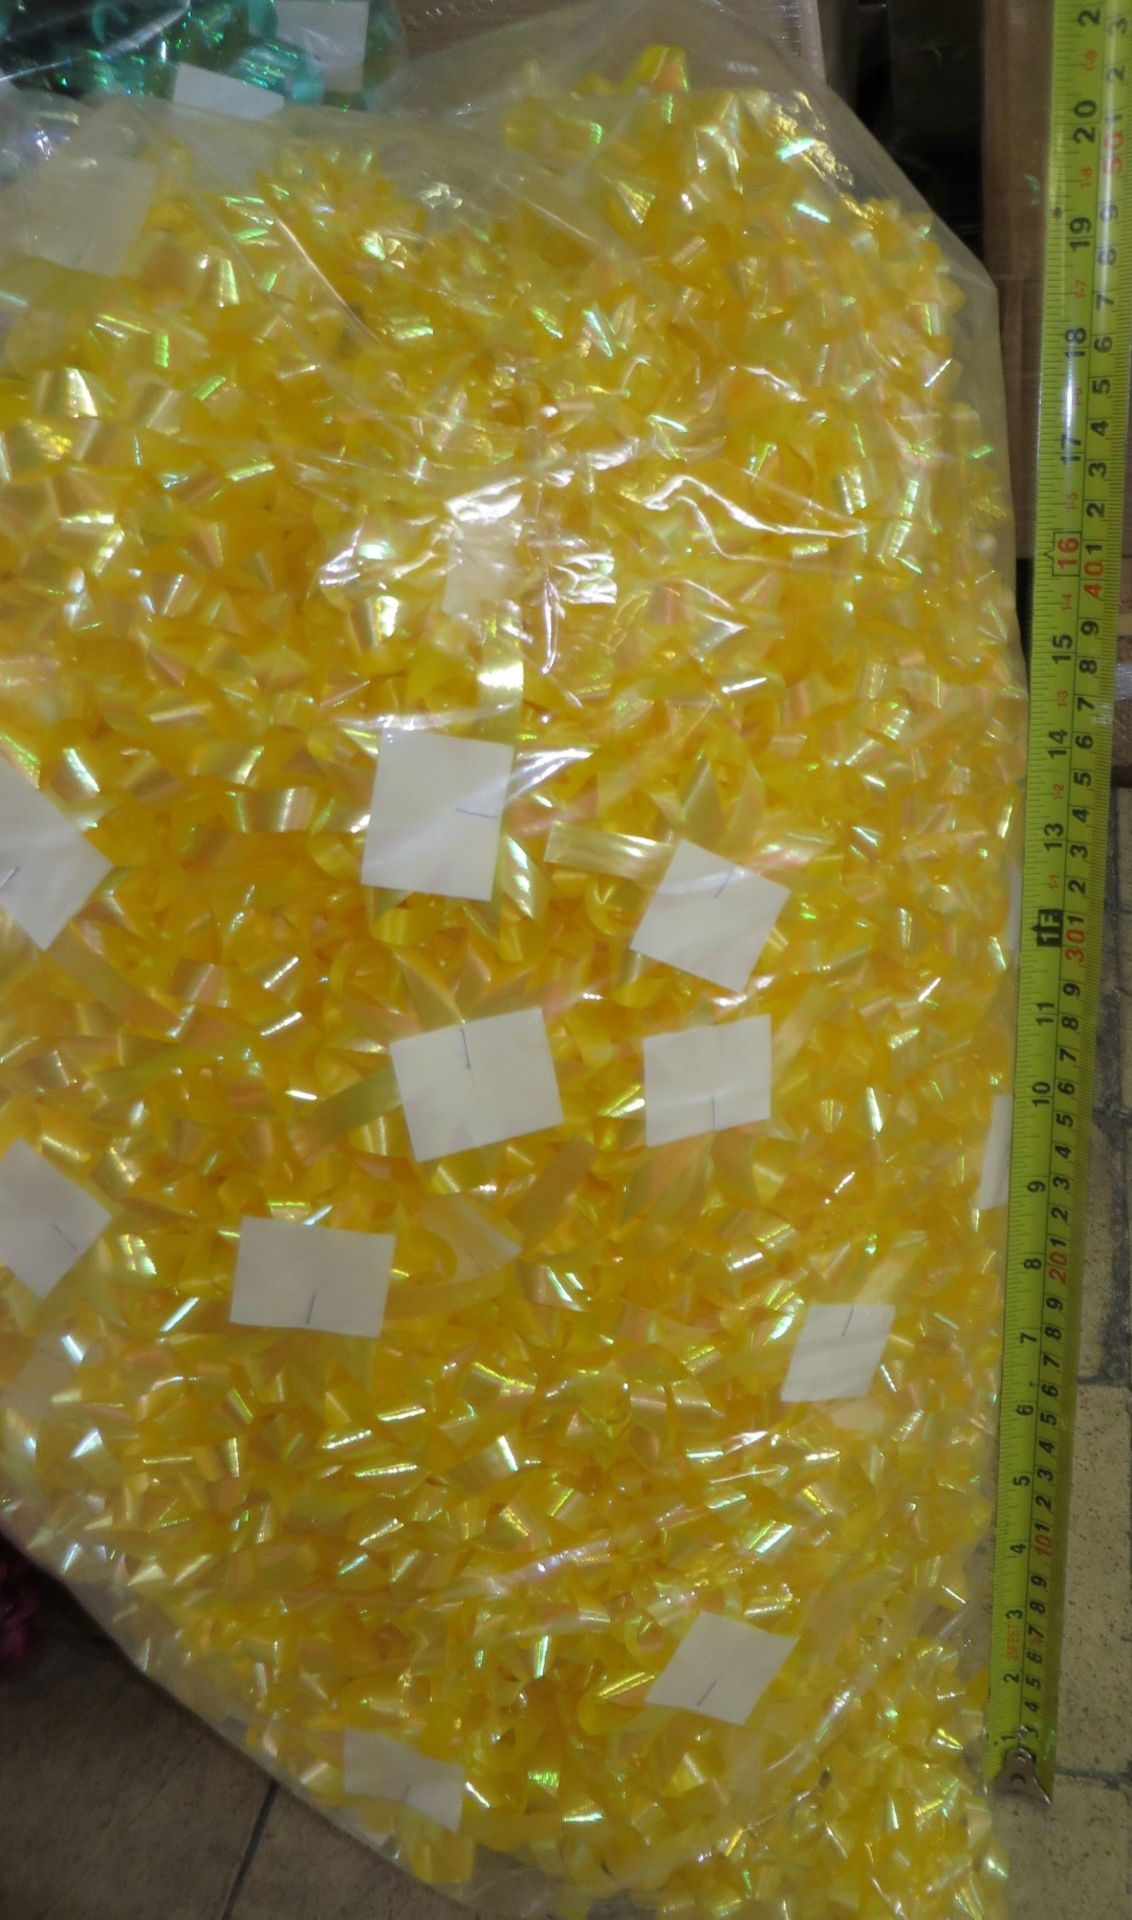 5 x Large Bags of New Self-Adhesive Present Bows - CL185 - Ref: DSY0252 - Location: Stoke-on-Trent S - Image 8 of 8